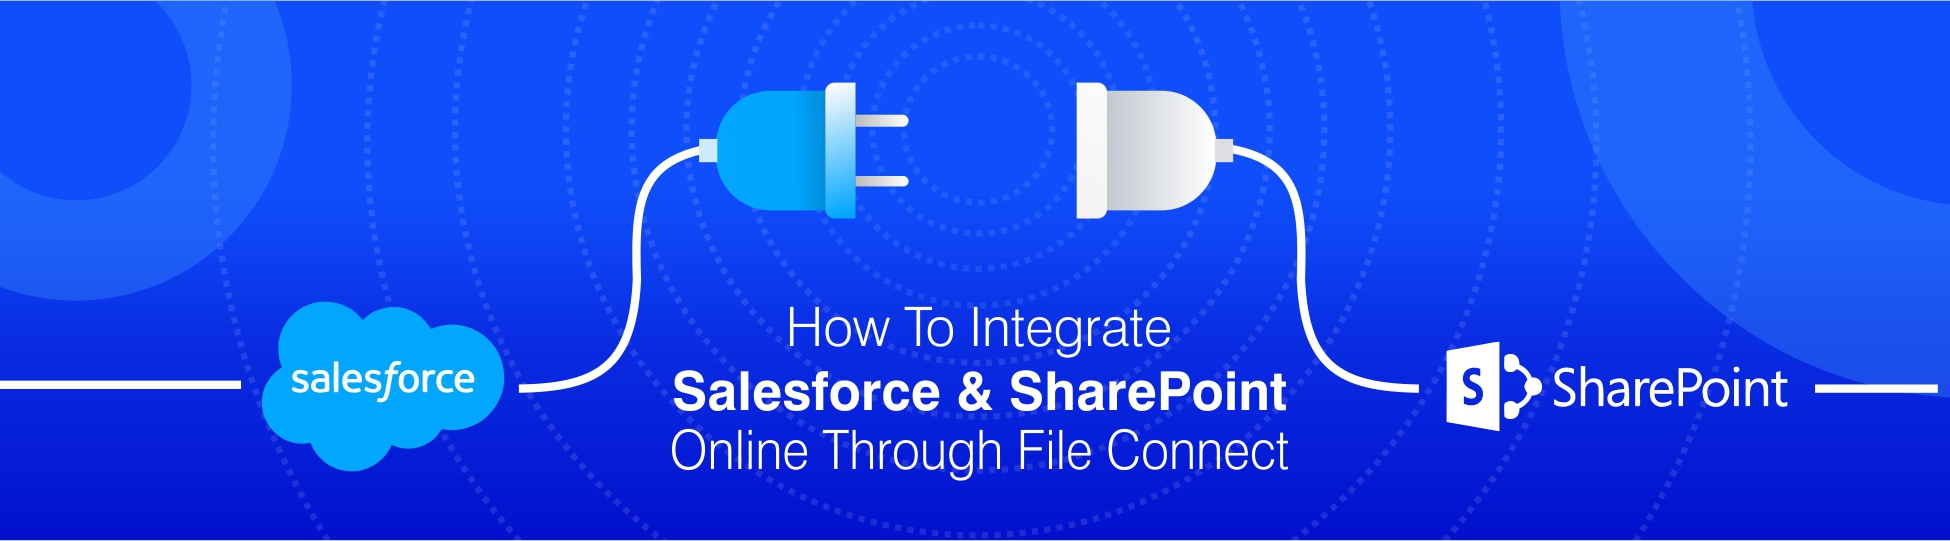 How-To-Integrate-Salesforce-SharePoint-Online-Through-File-Connect